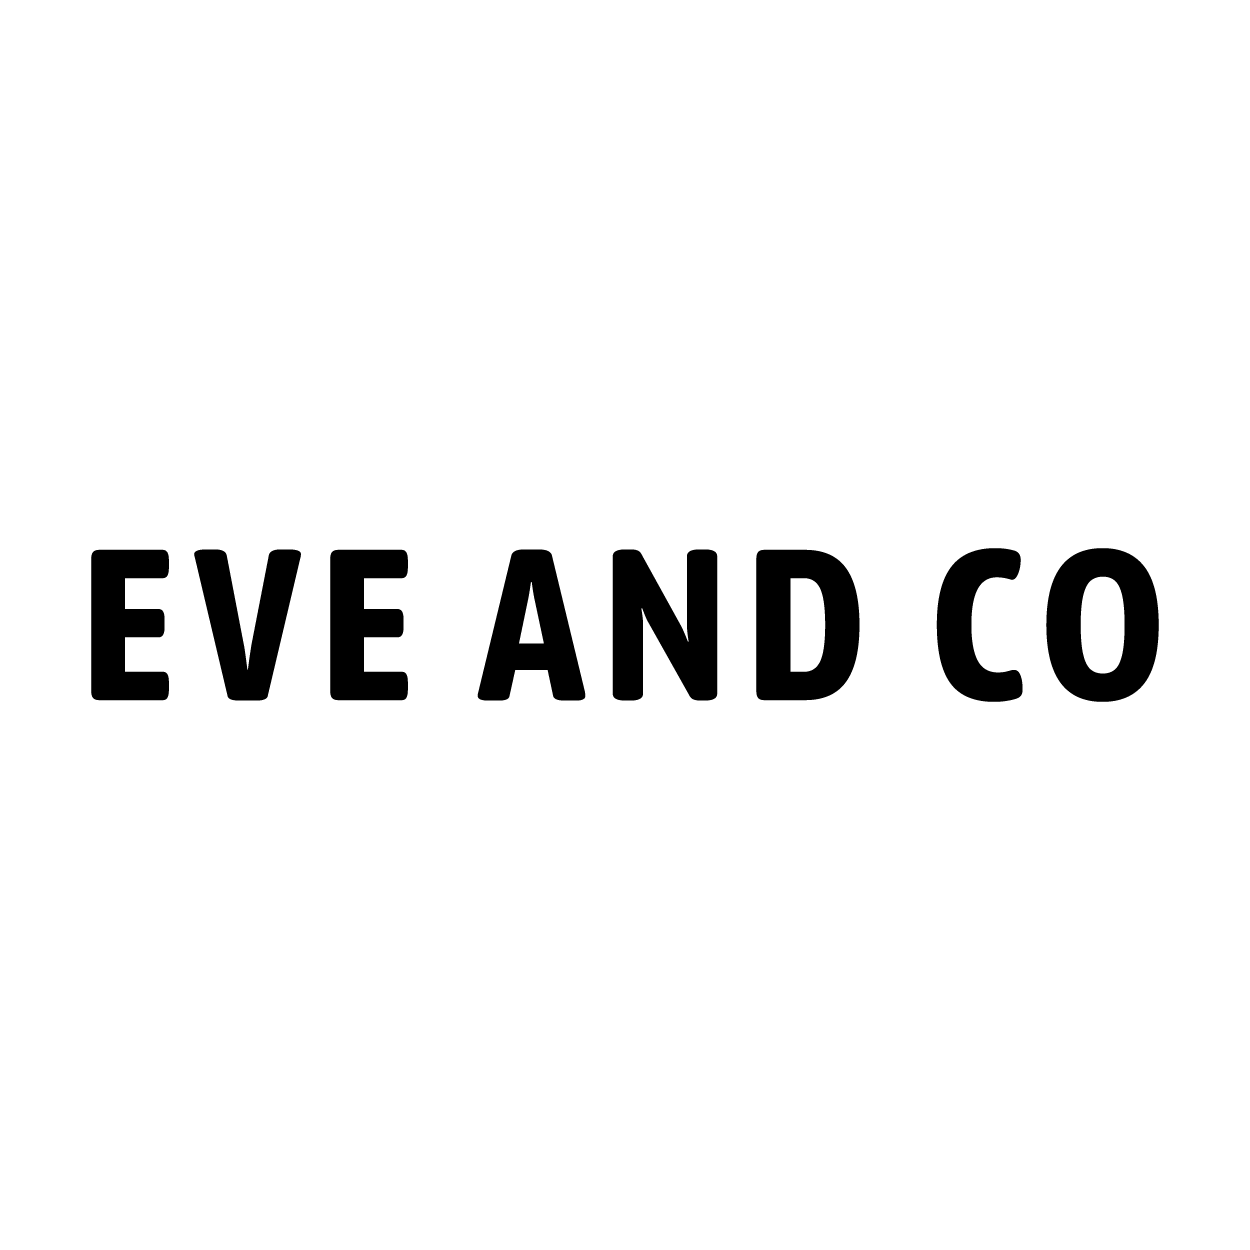 Eve and Co